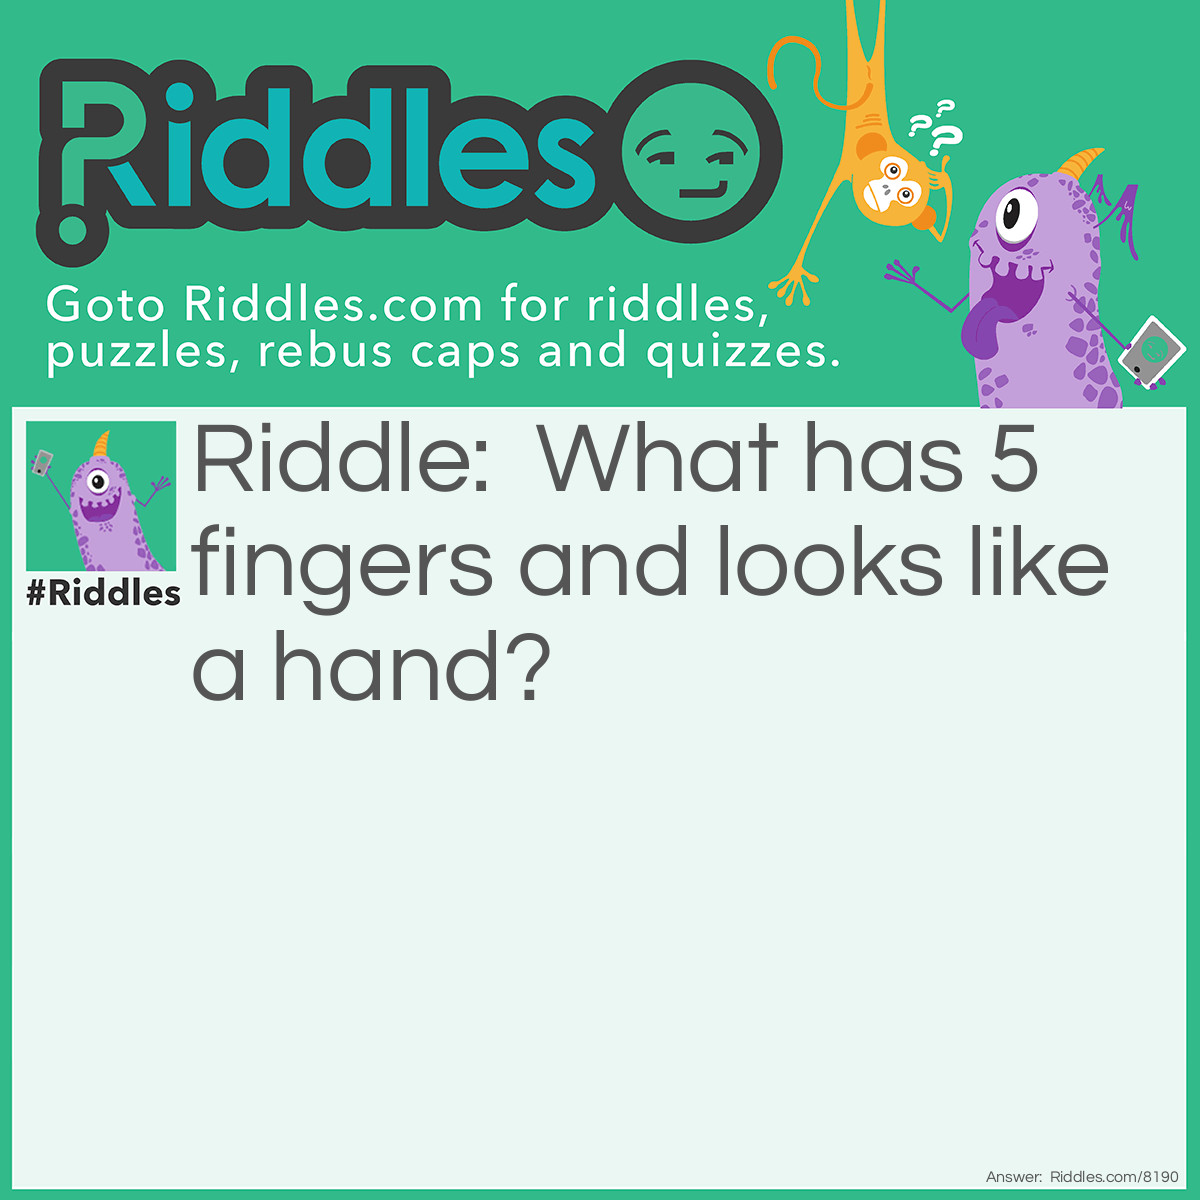 Riddle: What has 5 fingers and looks like a hand? Answer: A Hand :)